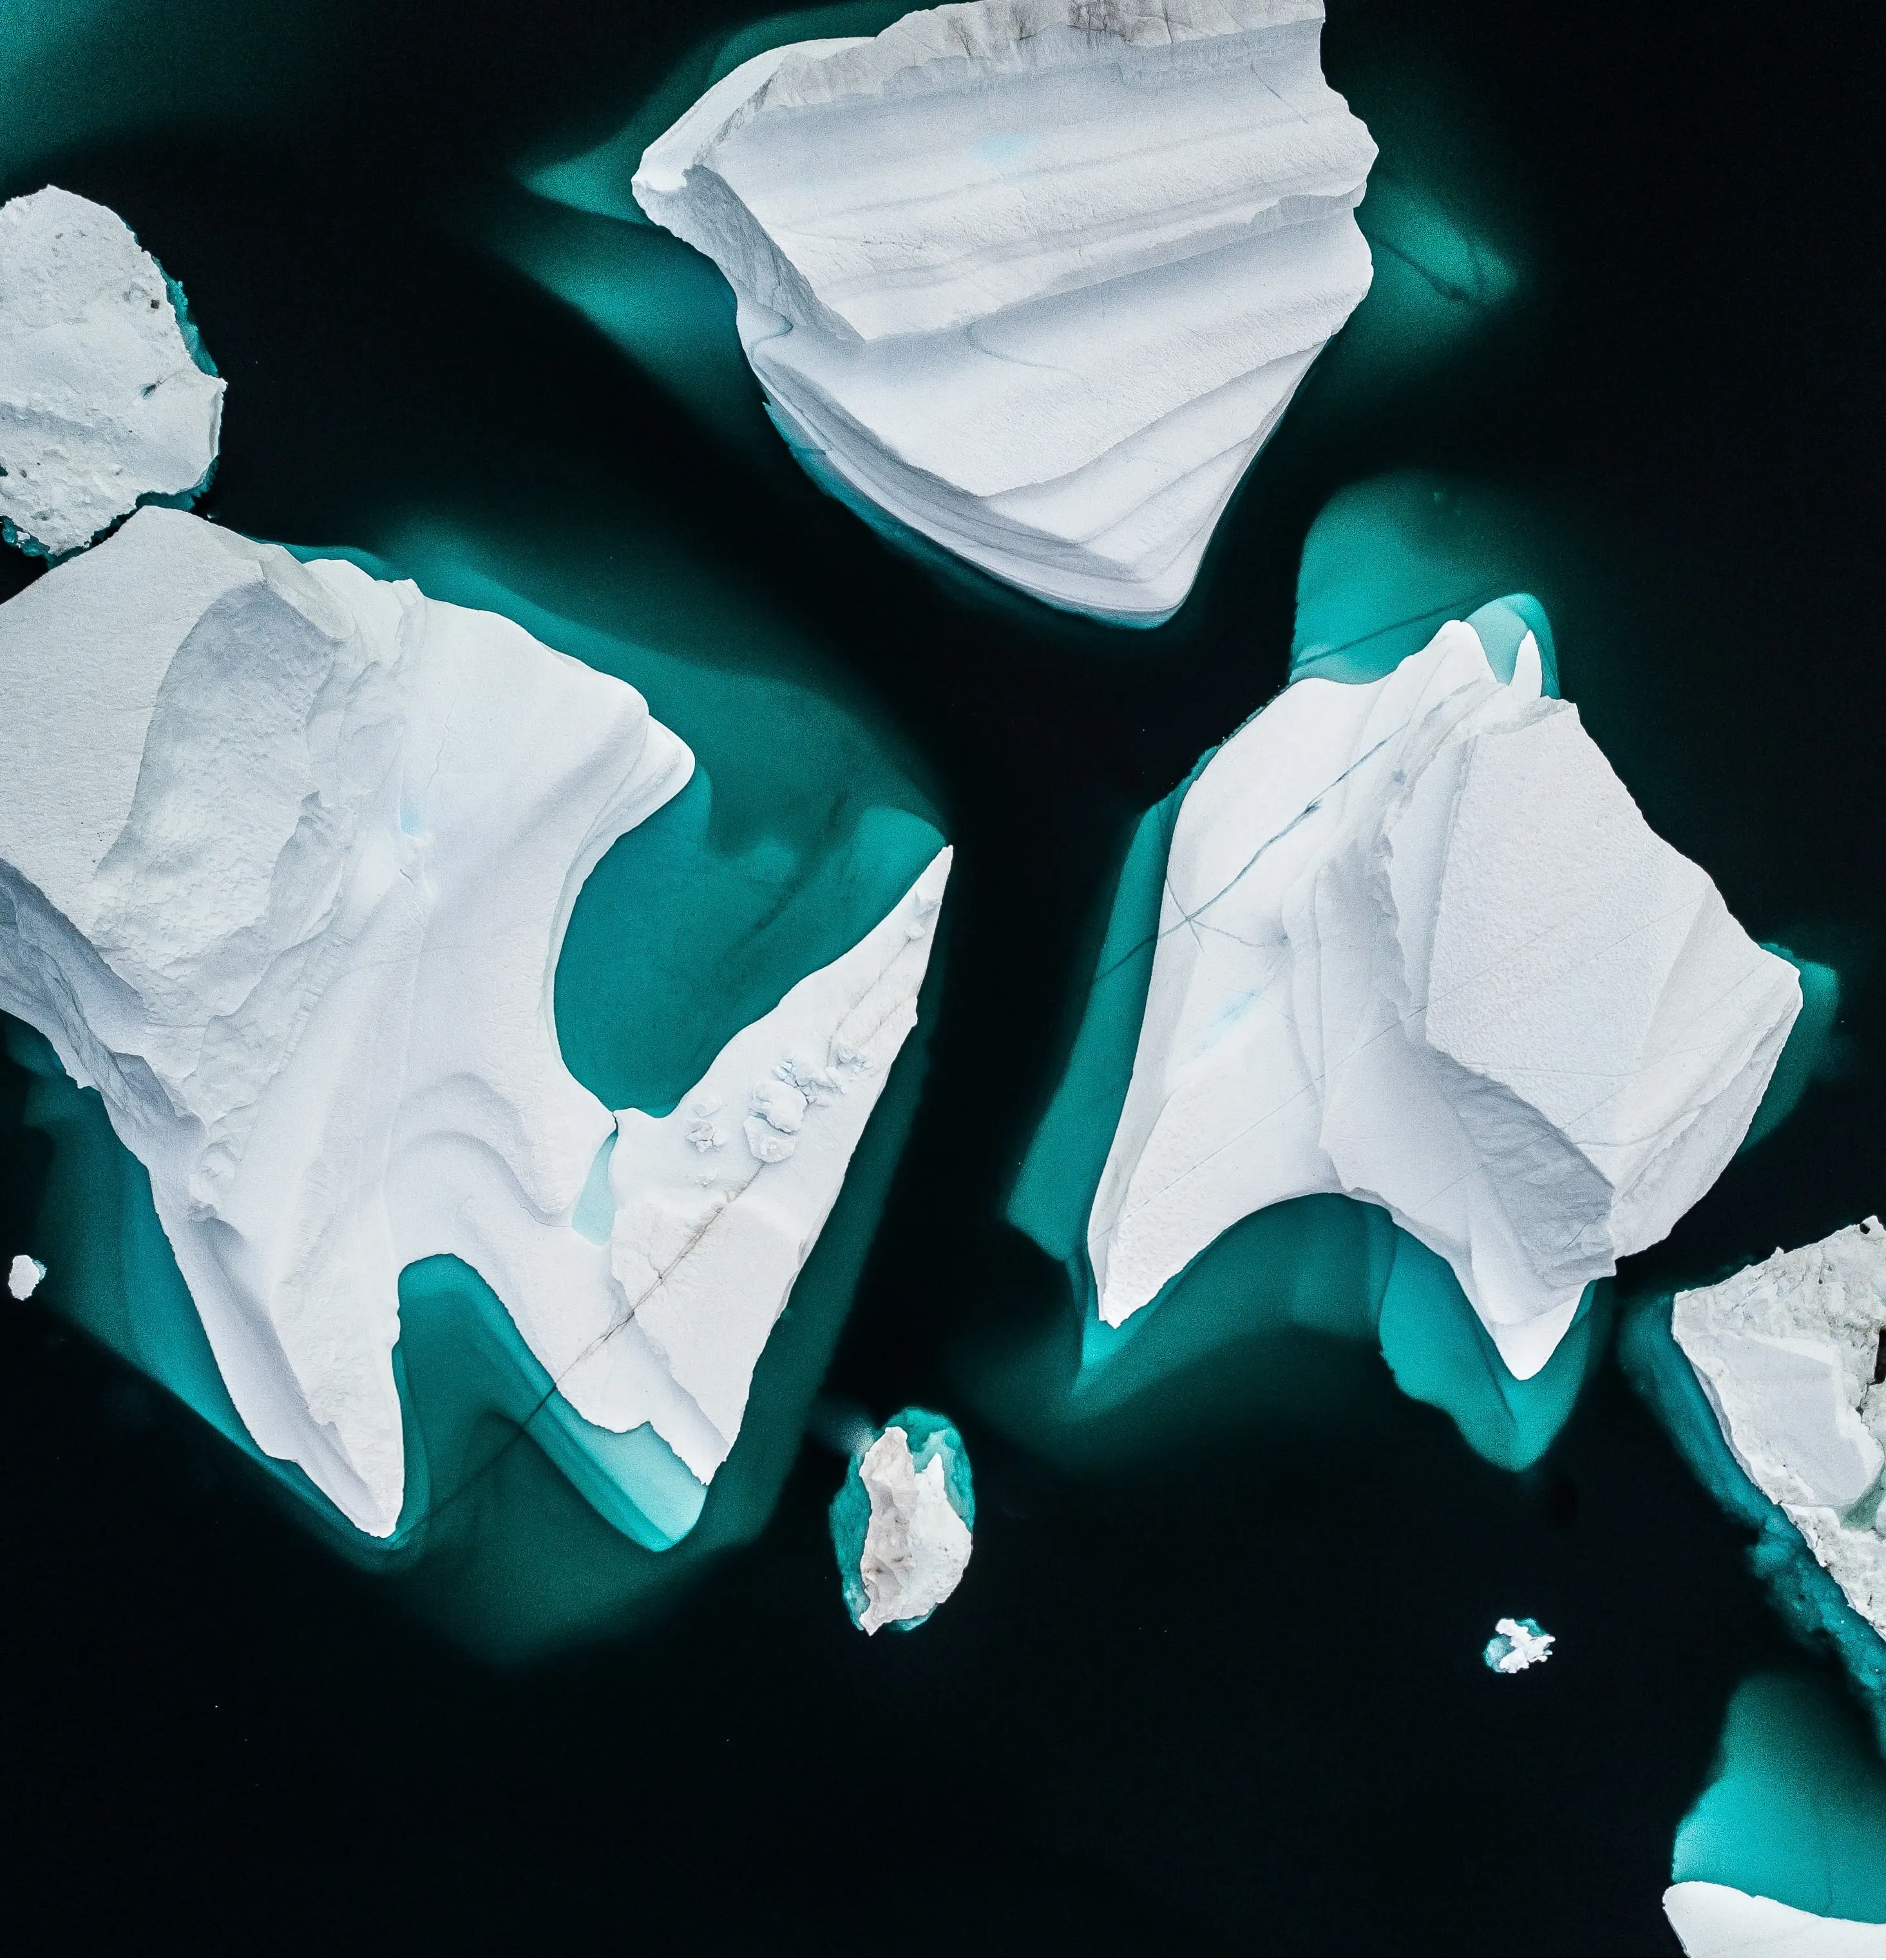 melting icebergs showing the effects of climate change 